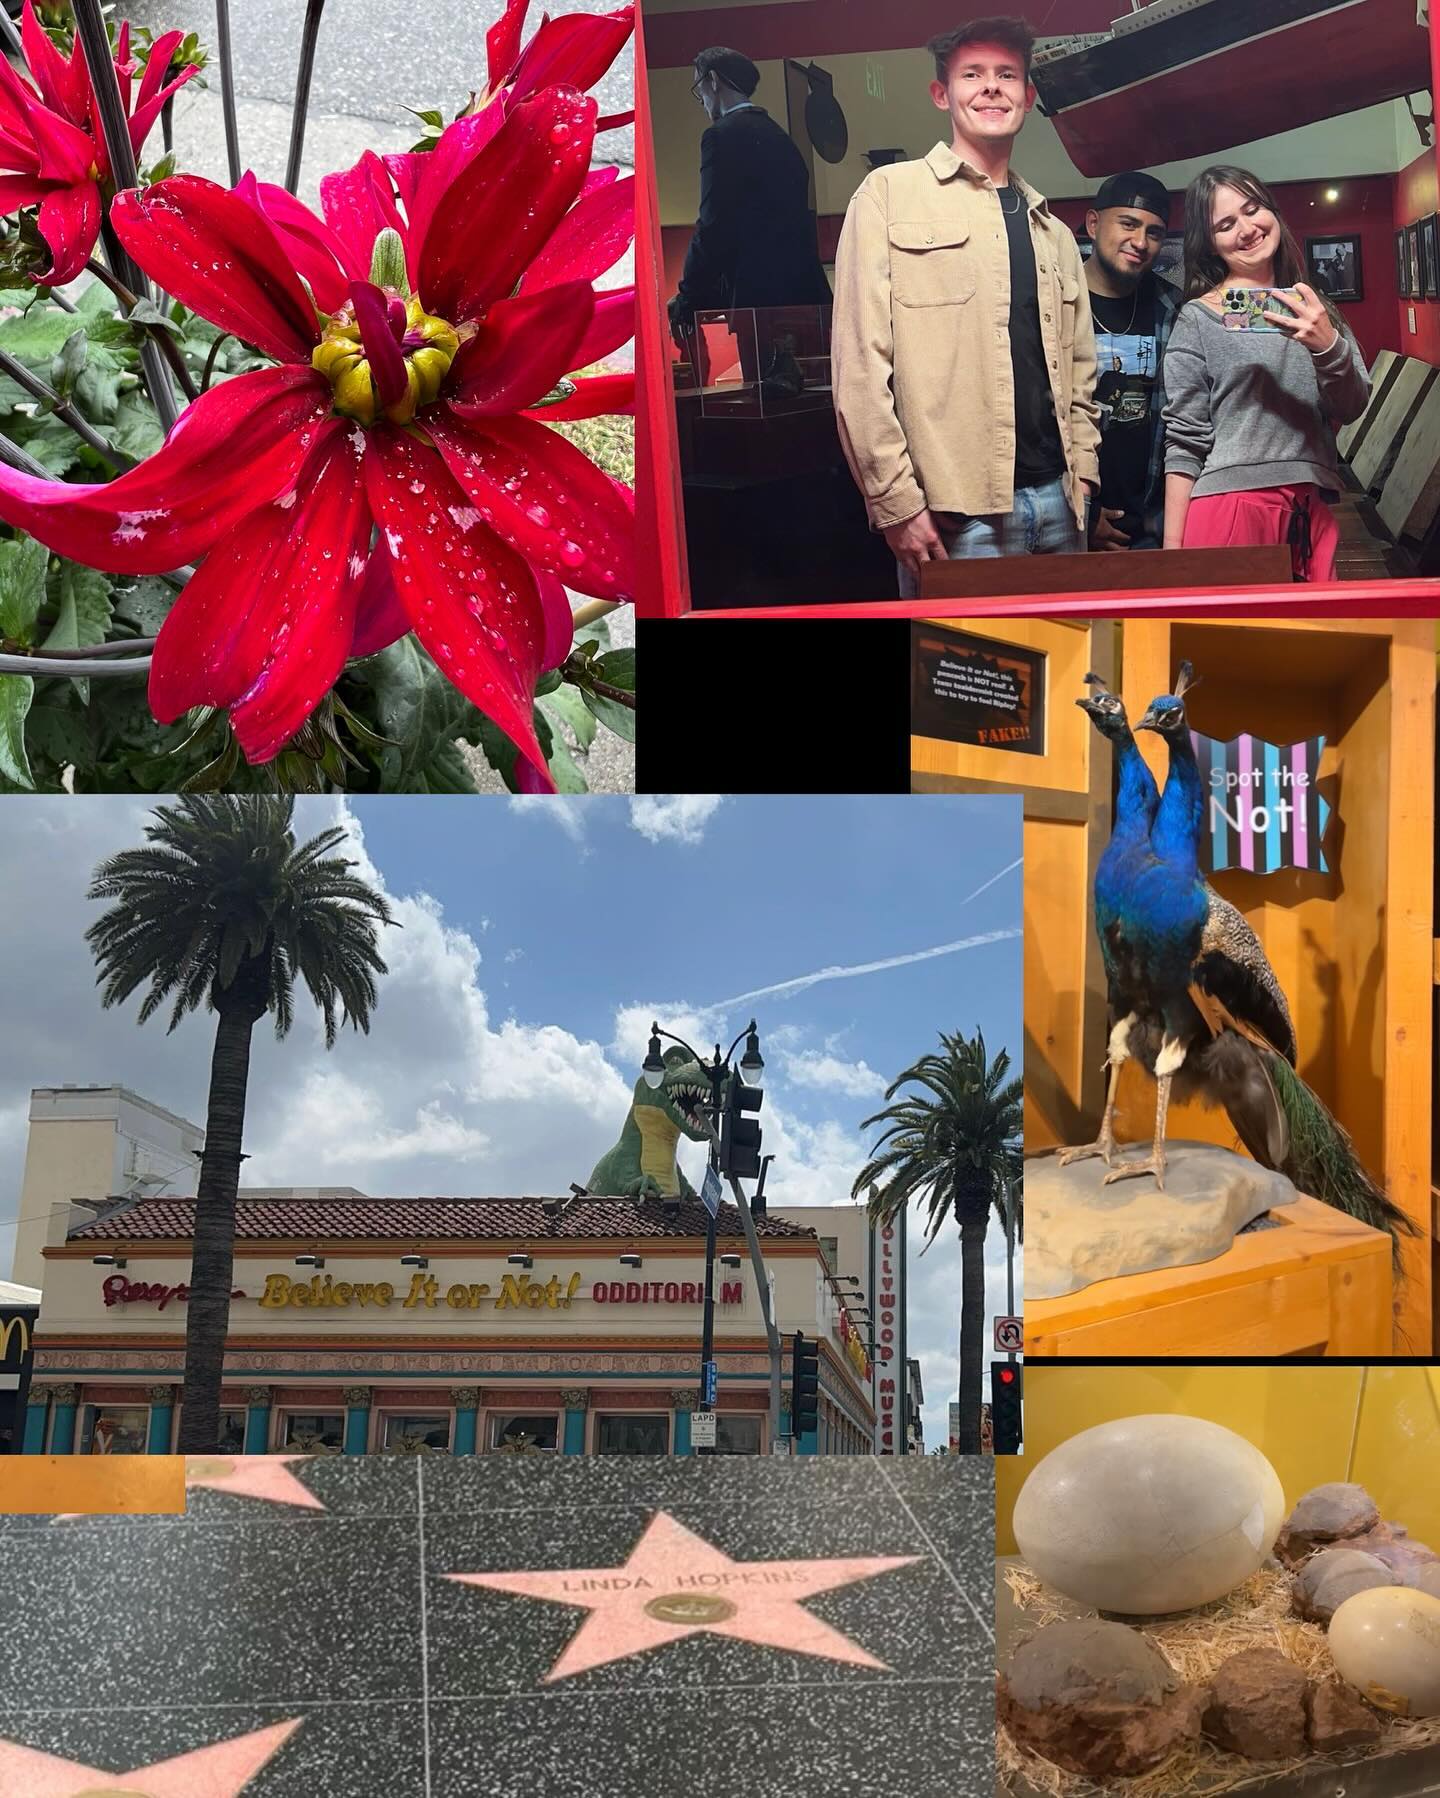 There’s something in the air in Hollywood 🎥🎞️🤩
•
•
•
•
•
•
•
#cali #california #hollywood #westhollywood #walkoffame #ripleysbelieveitornot #oddities #marilynmonroe #jimihendrix #celebrity #celebrities ##calitrip #trip #vacation #daytrip #friends #adventure #travel #travelgram #traveling #hollywoodstars #star #stars #hellokitty #ootd #nightout #nightclubs #nightclub #californiatrip